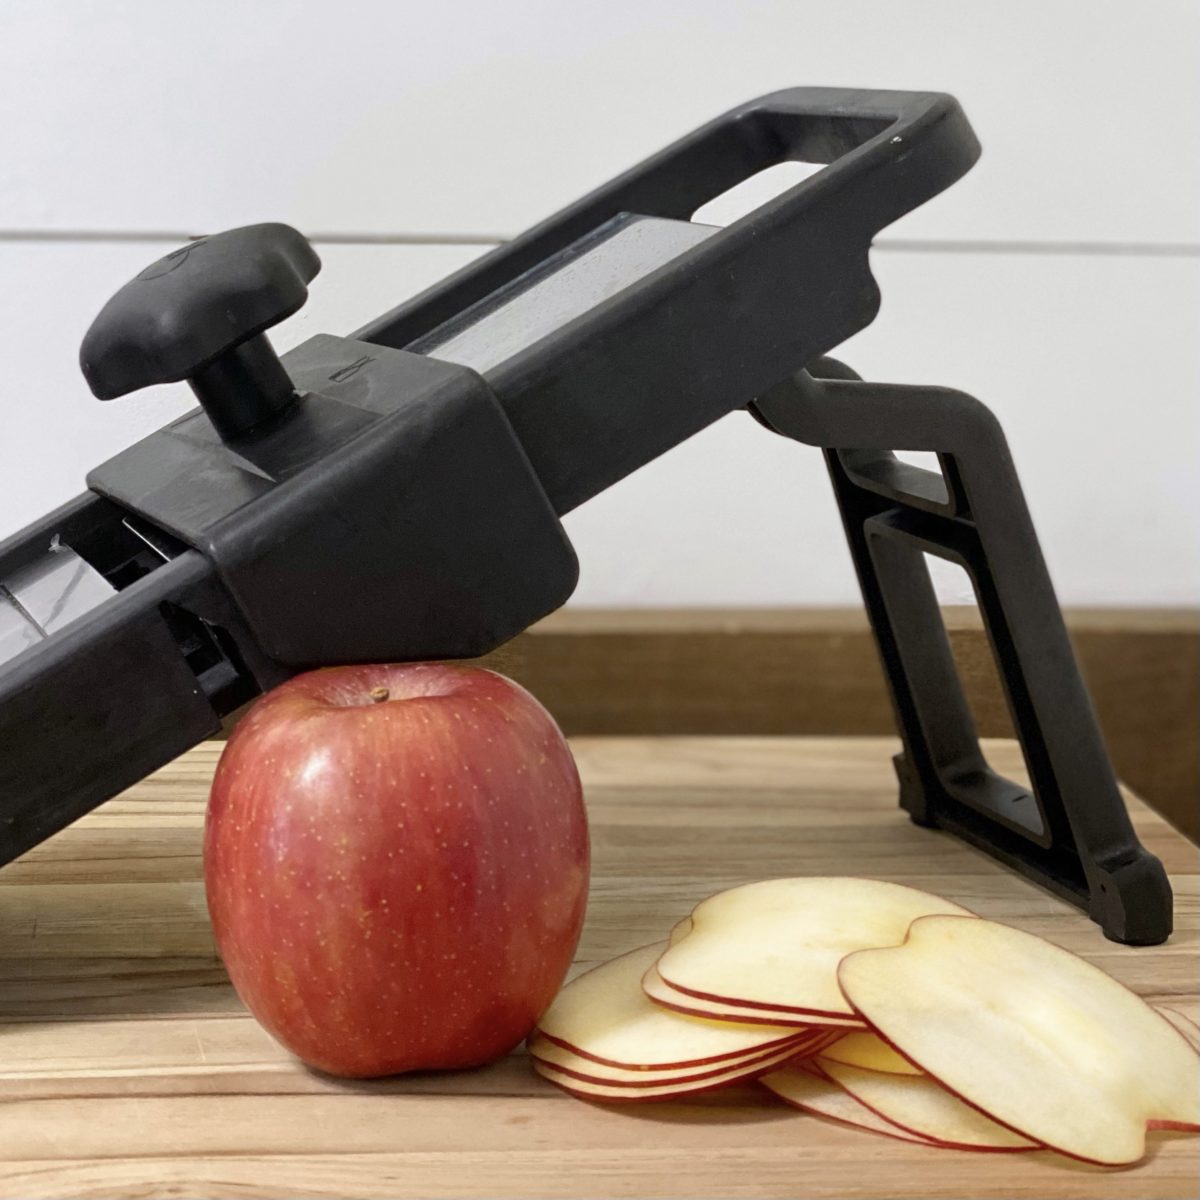 A mandoline slicer with an apple and apple slices next to it.